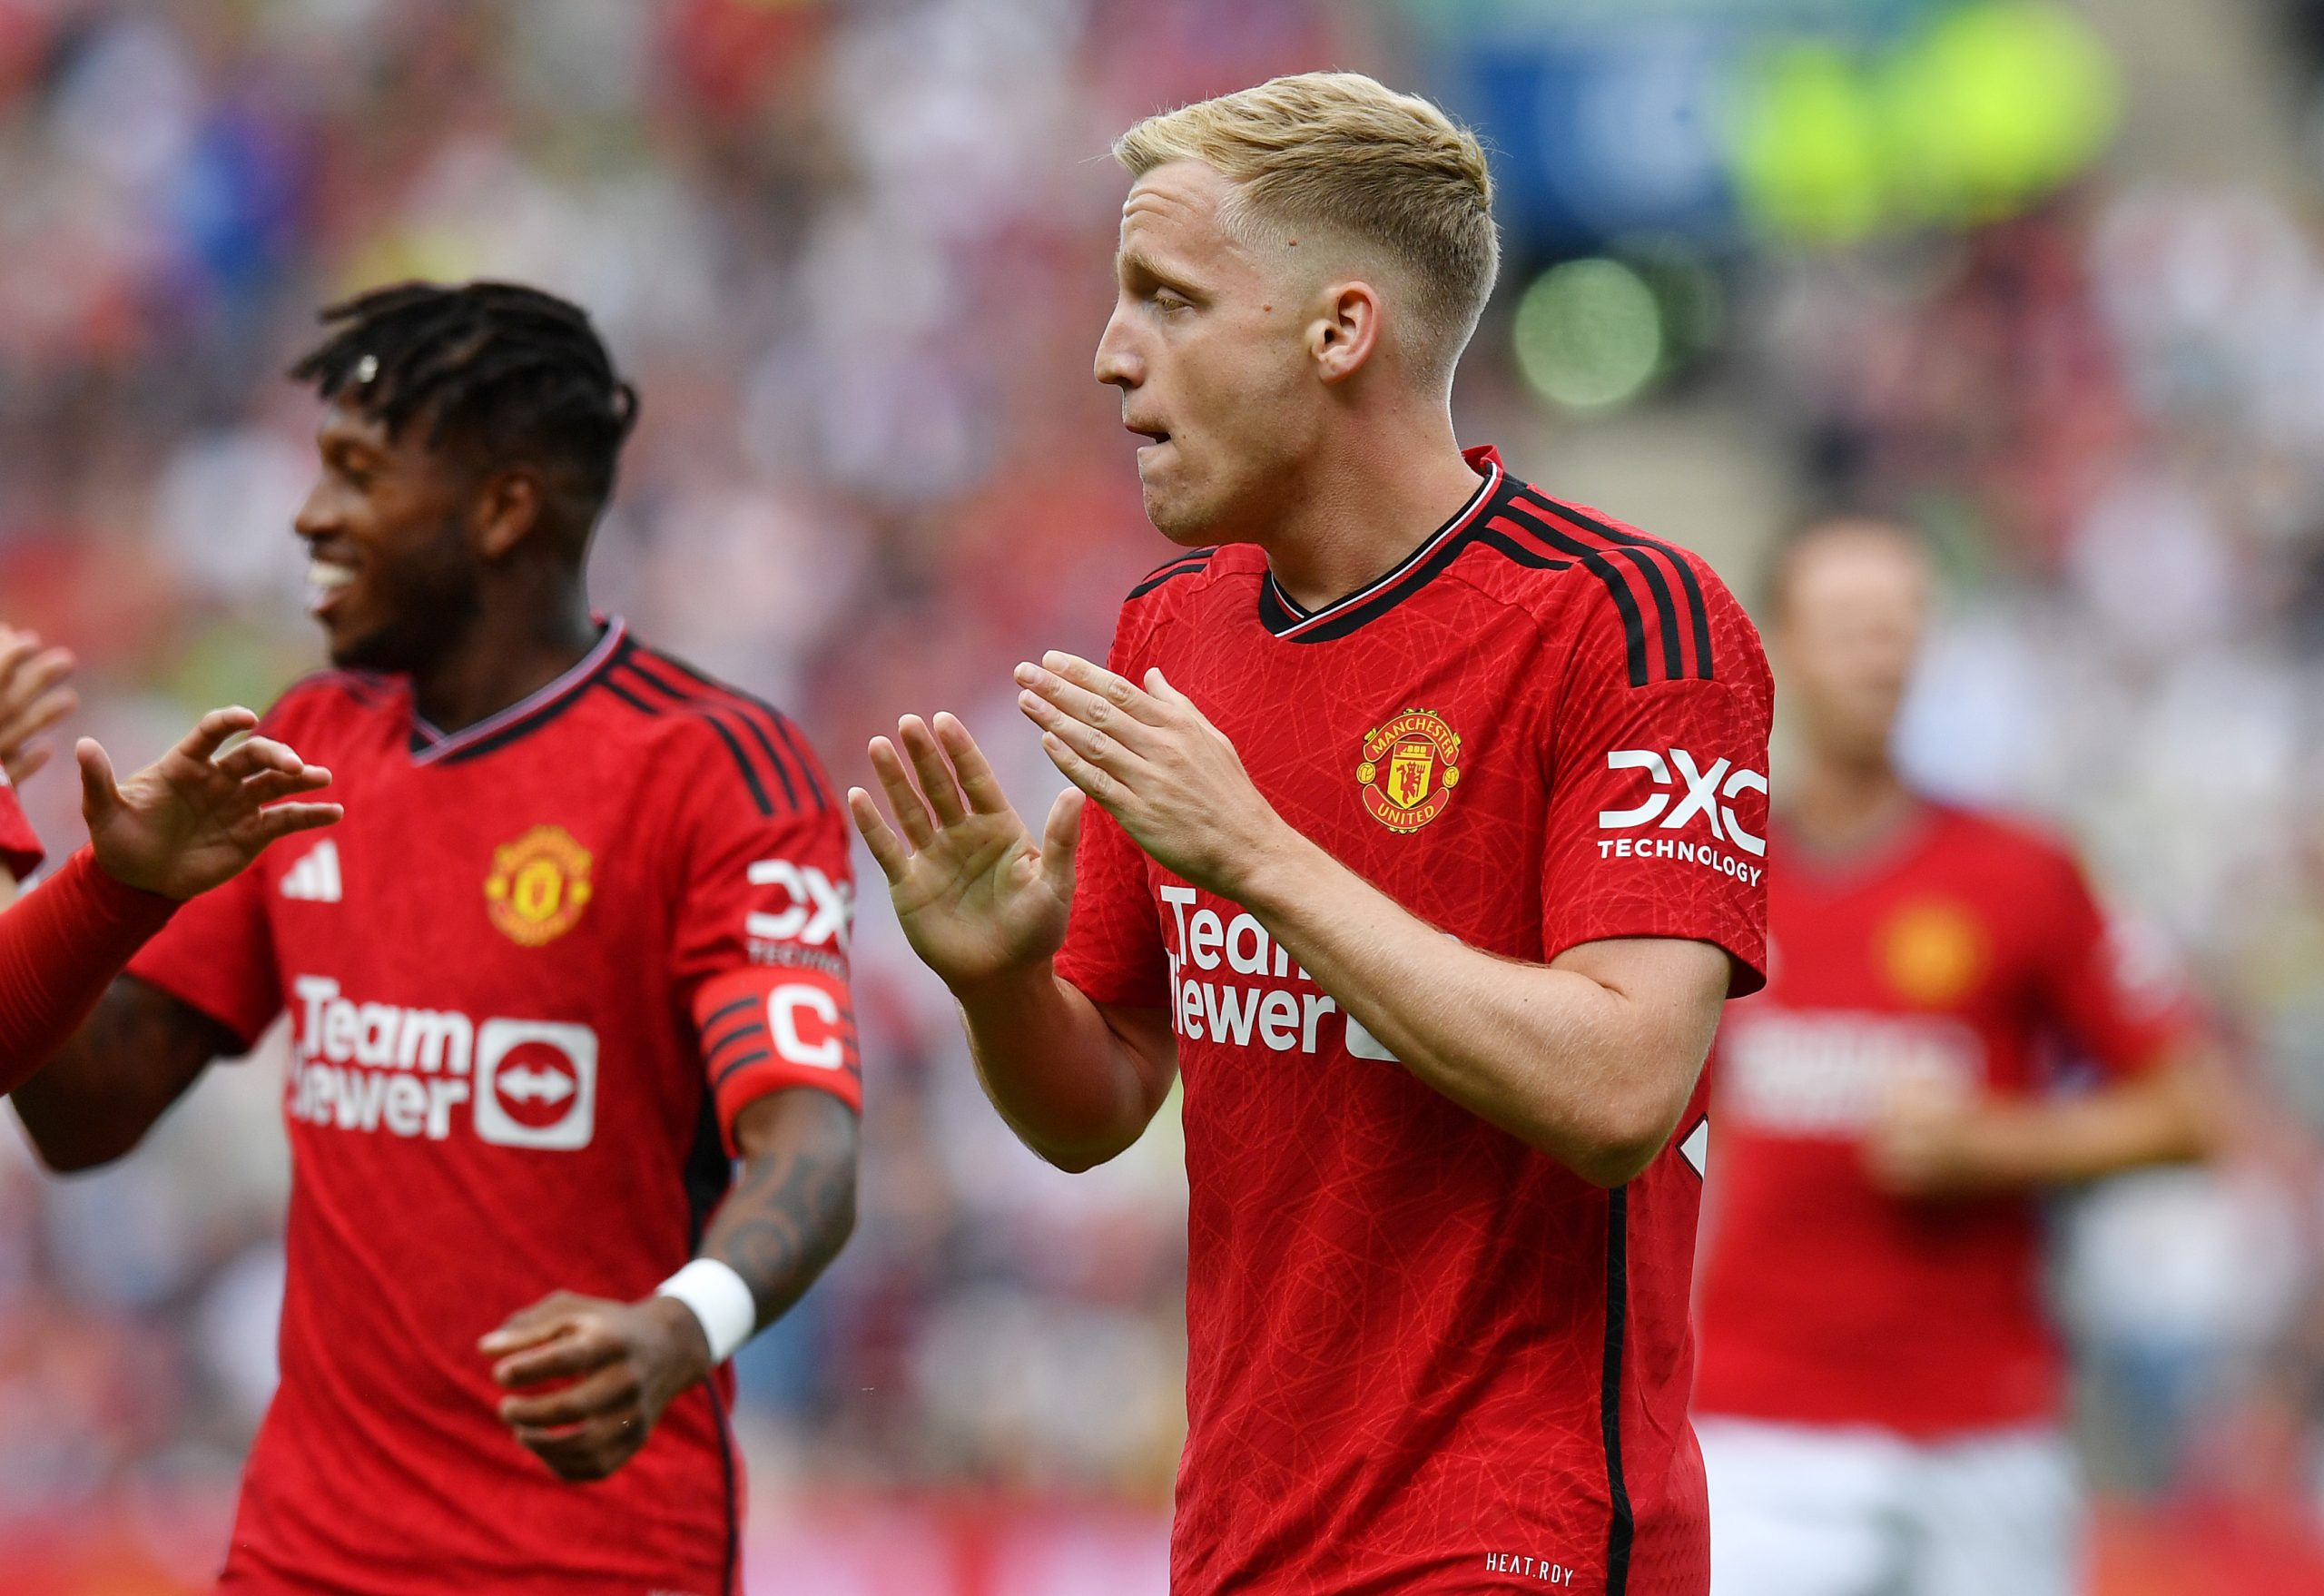 Donny Van de Beek is ready to call it quits at Manchester United in search of more game-time.